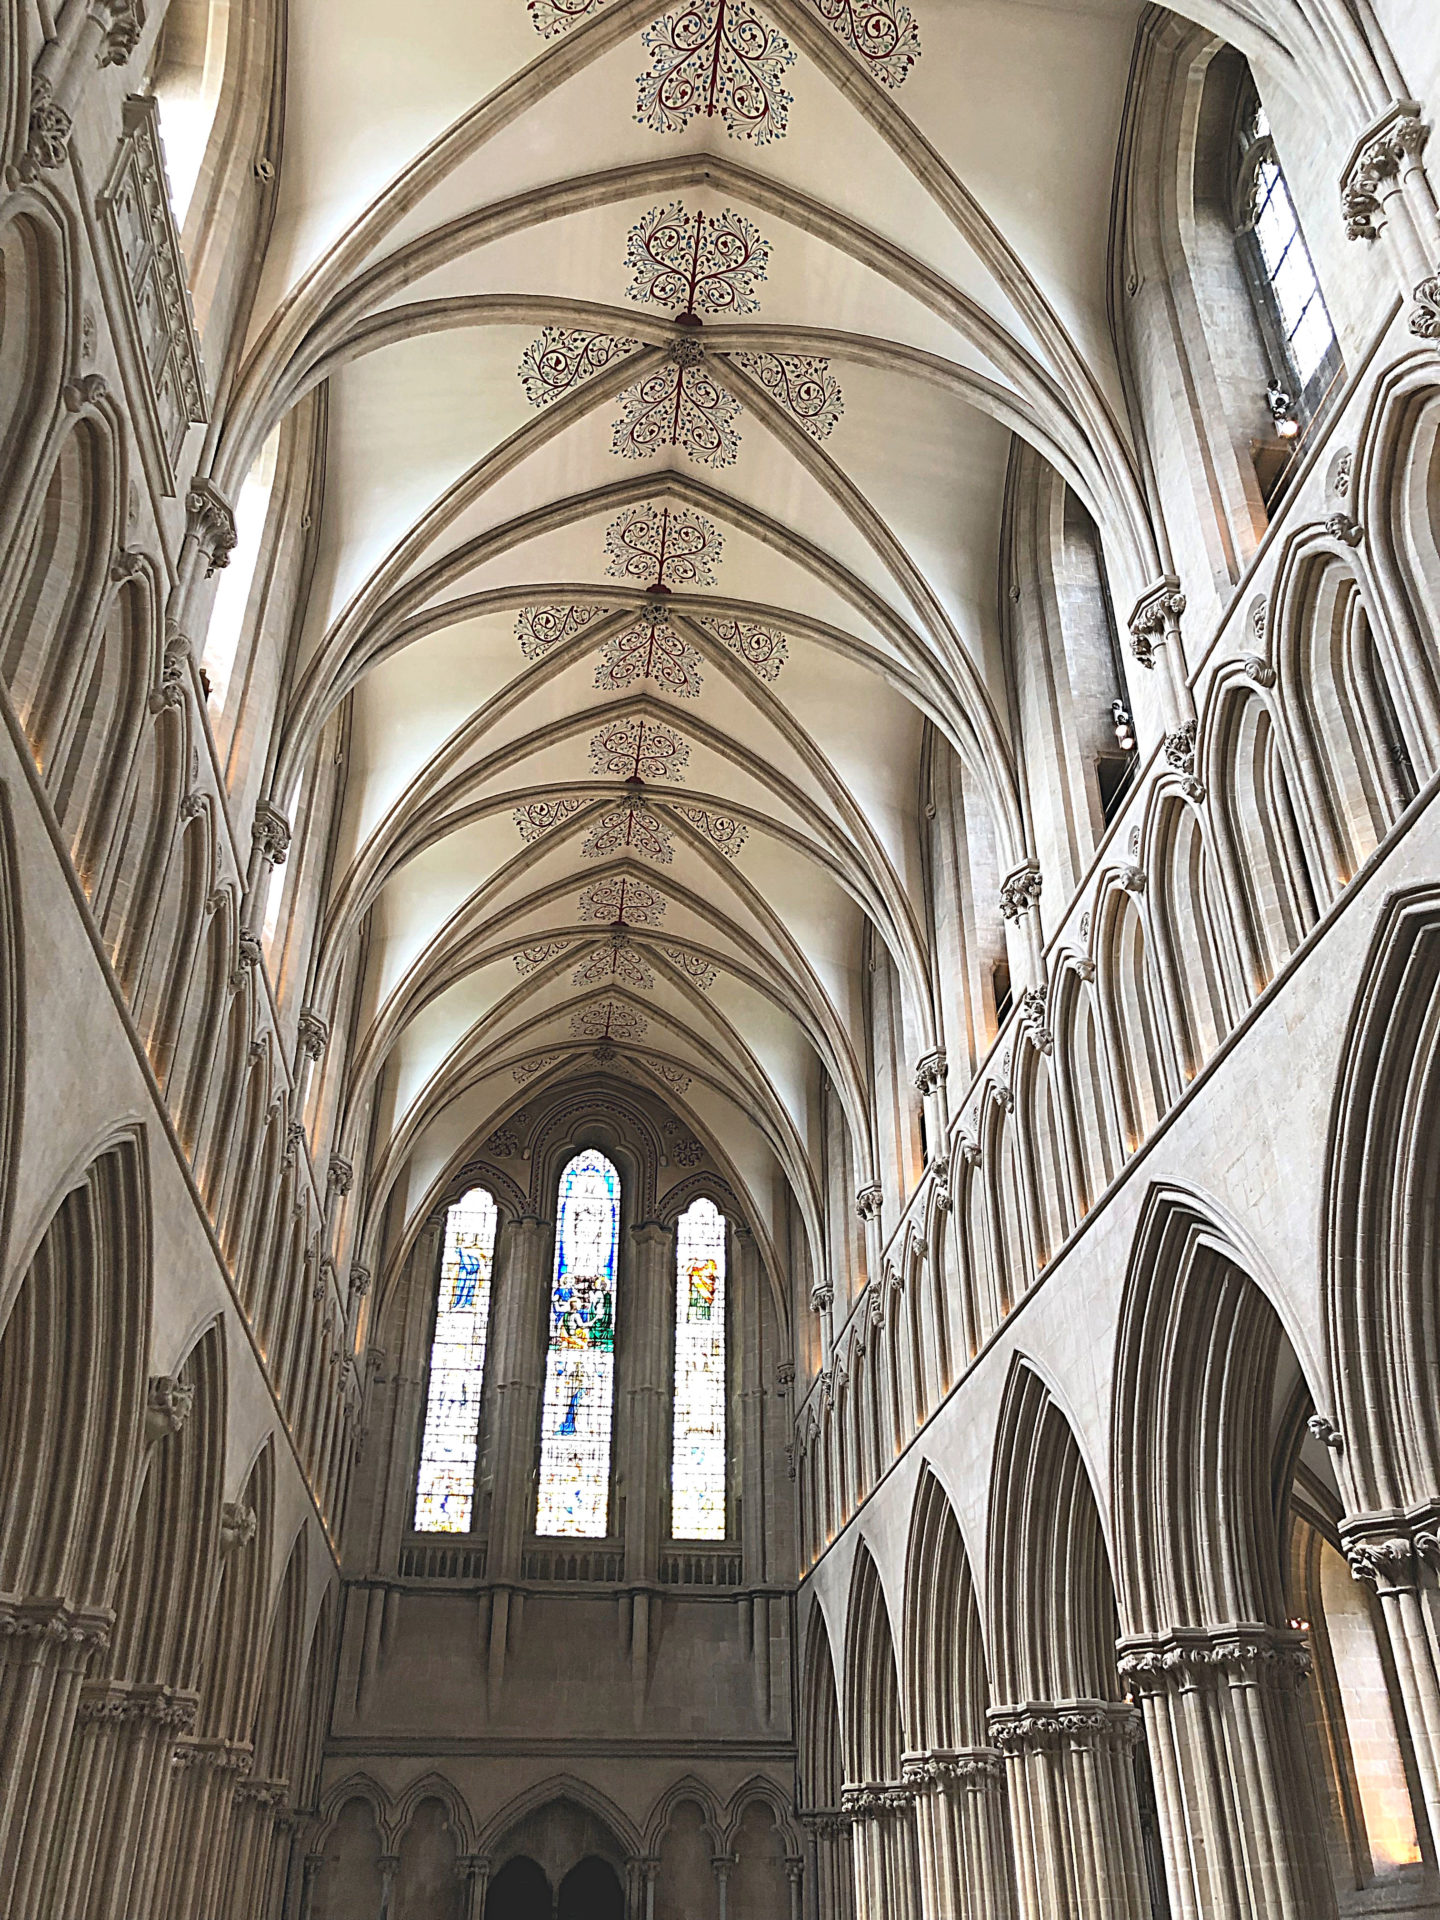 Inside Wells cathedral